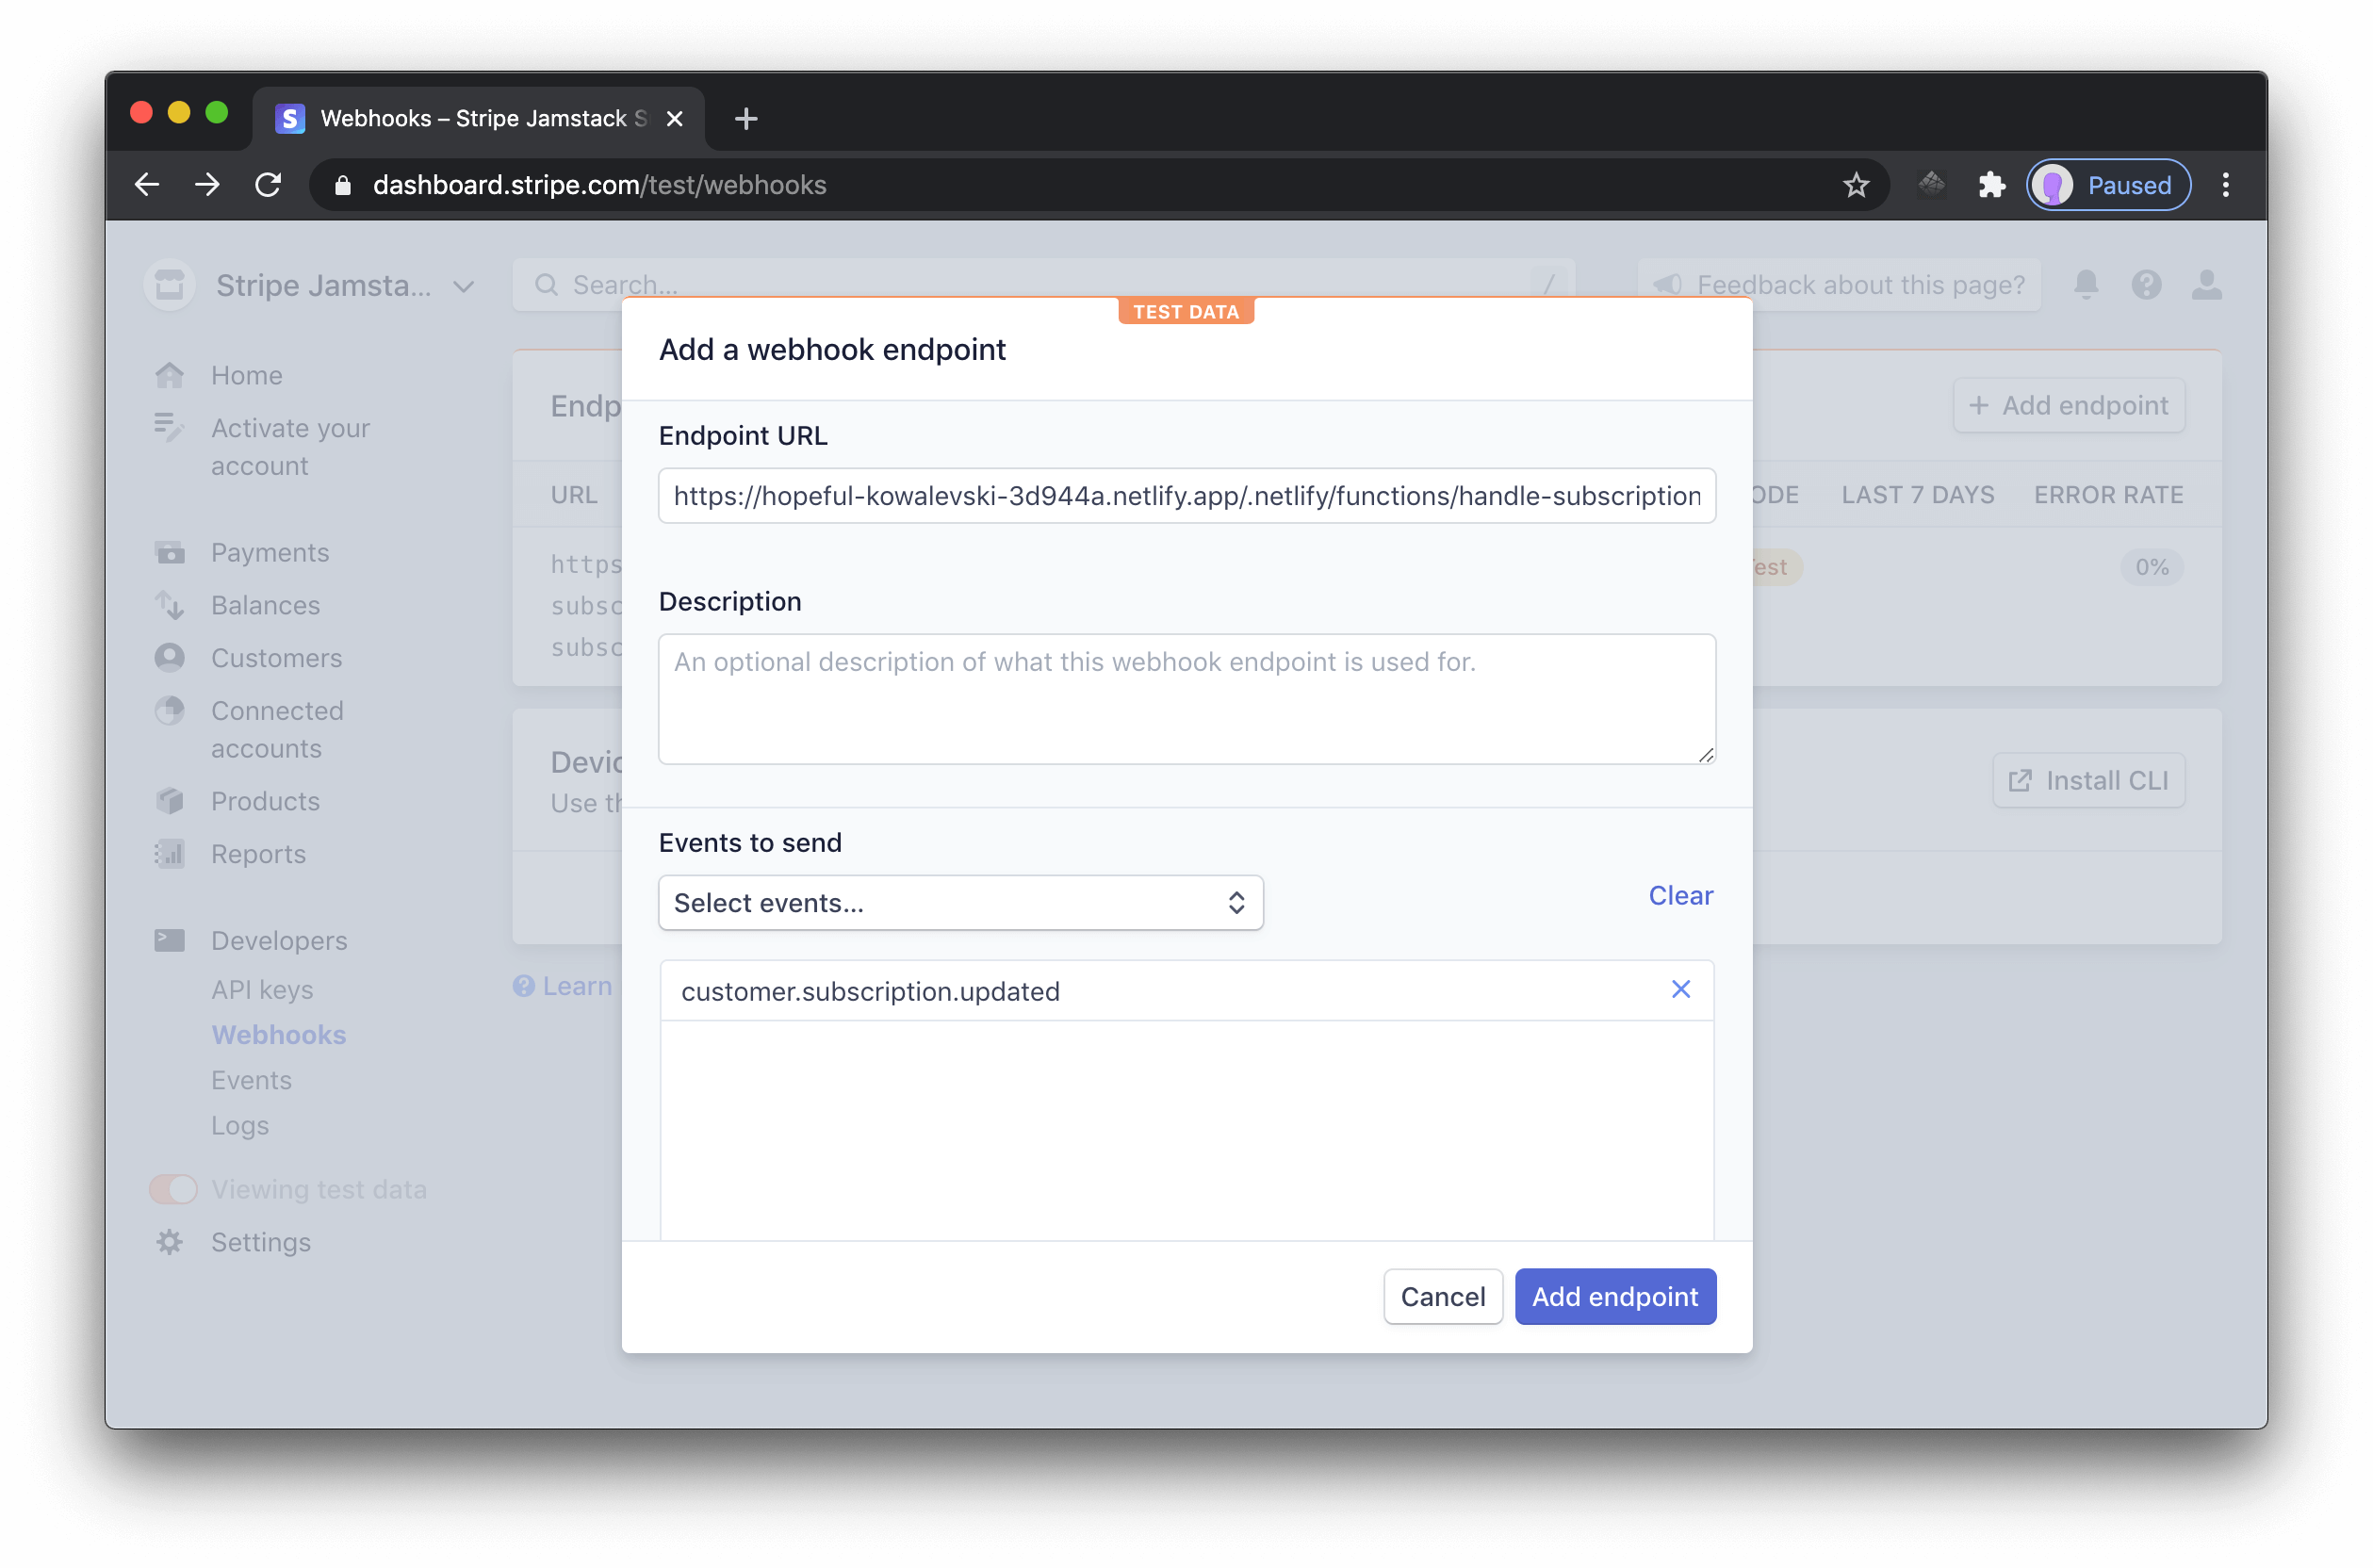 The webhook creation dialog in the Stripe dashboard.